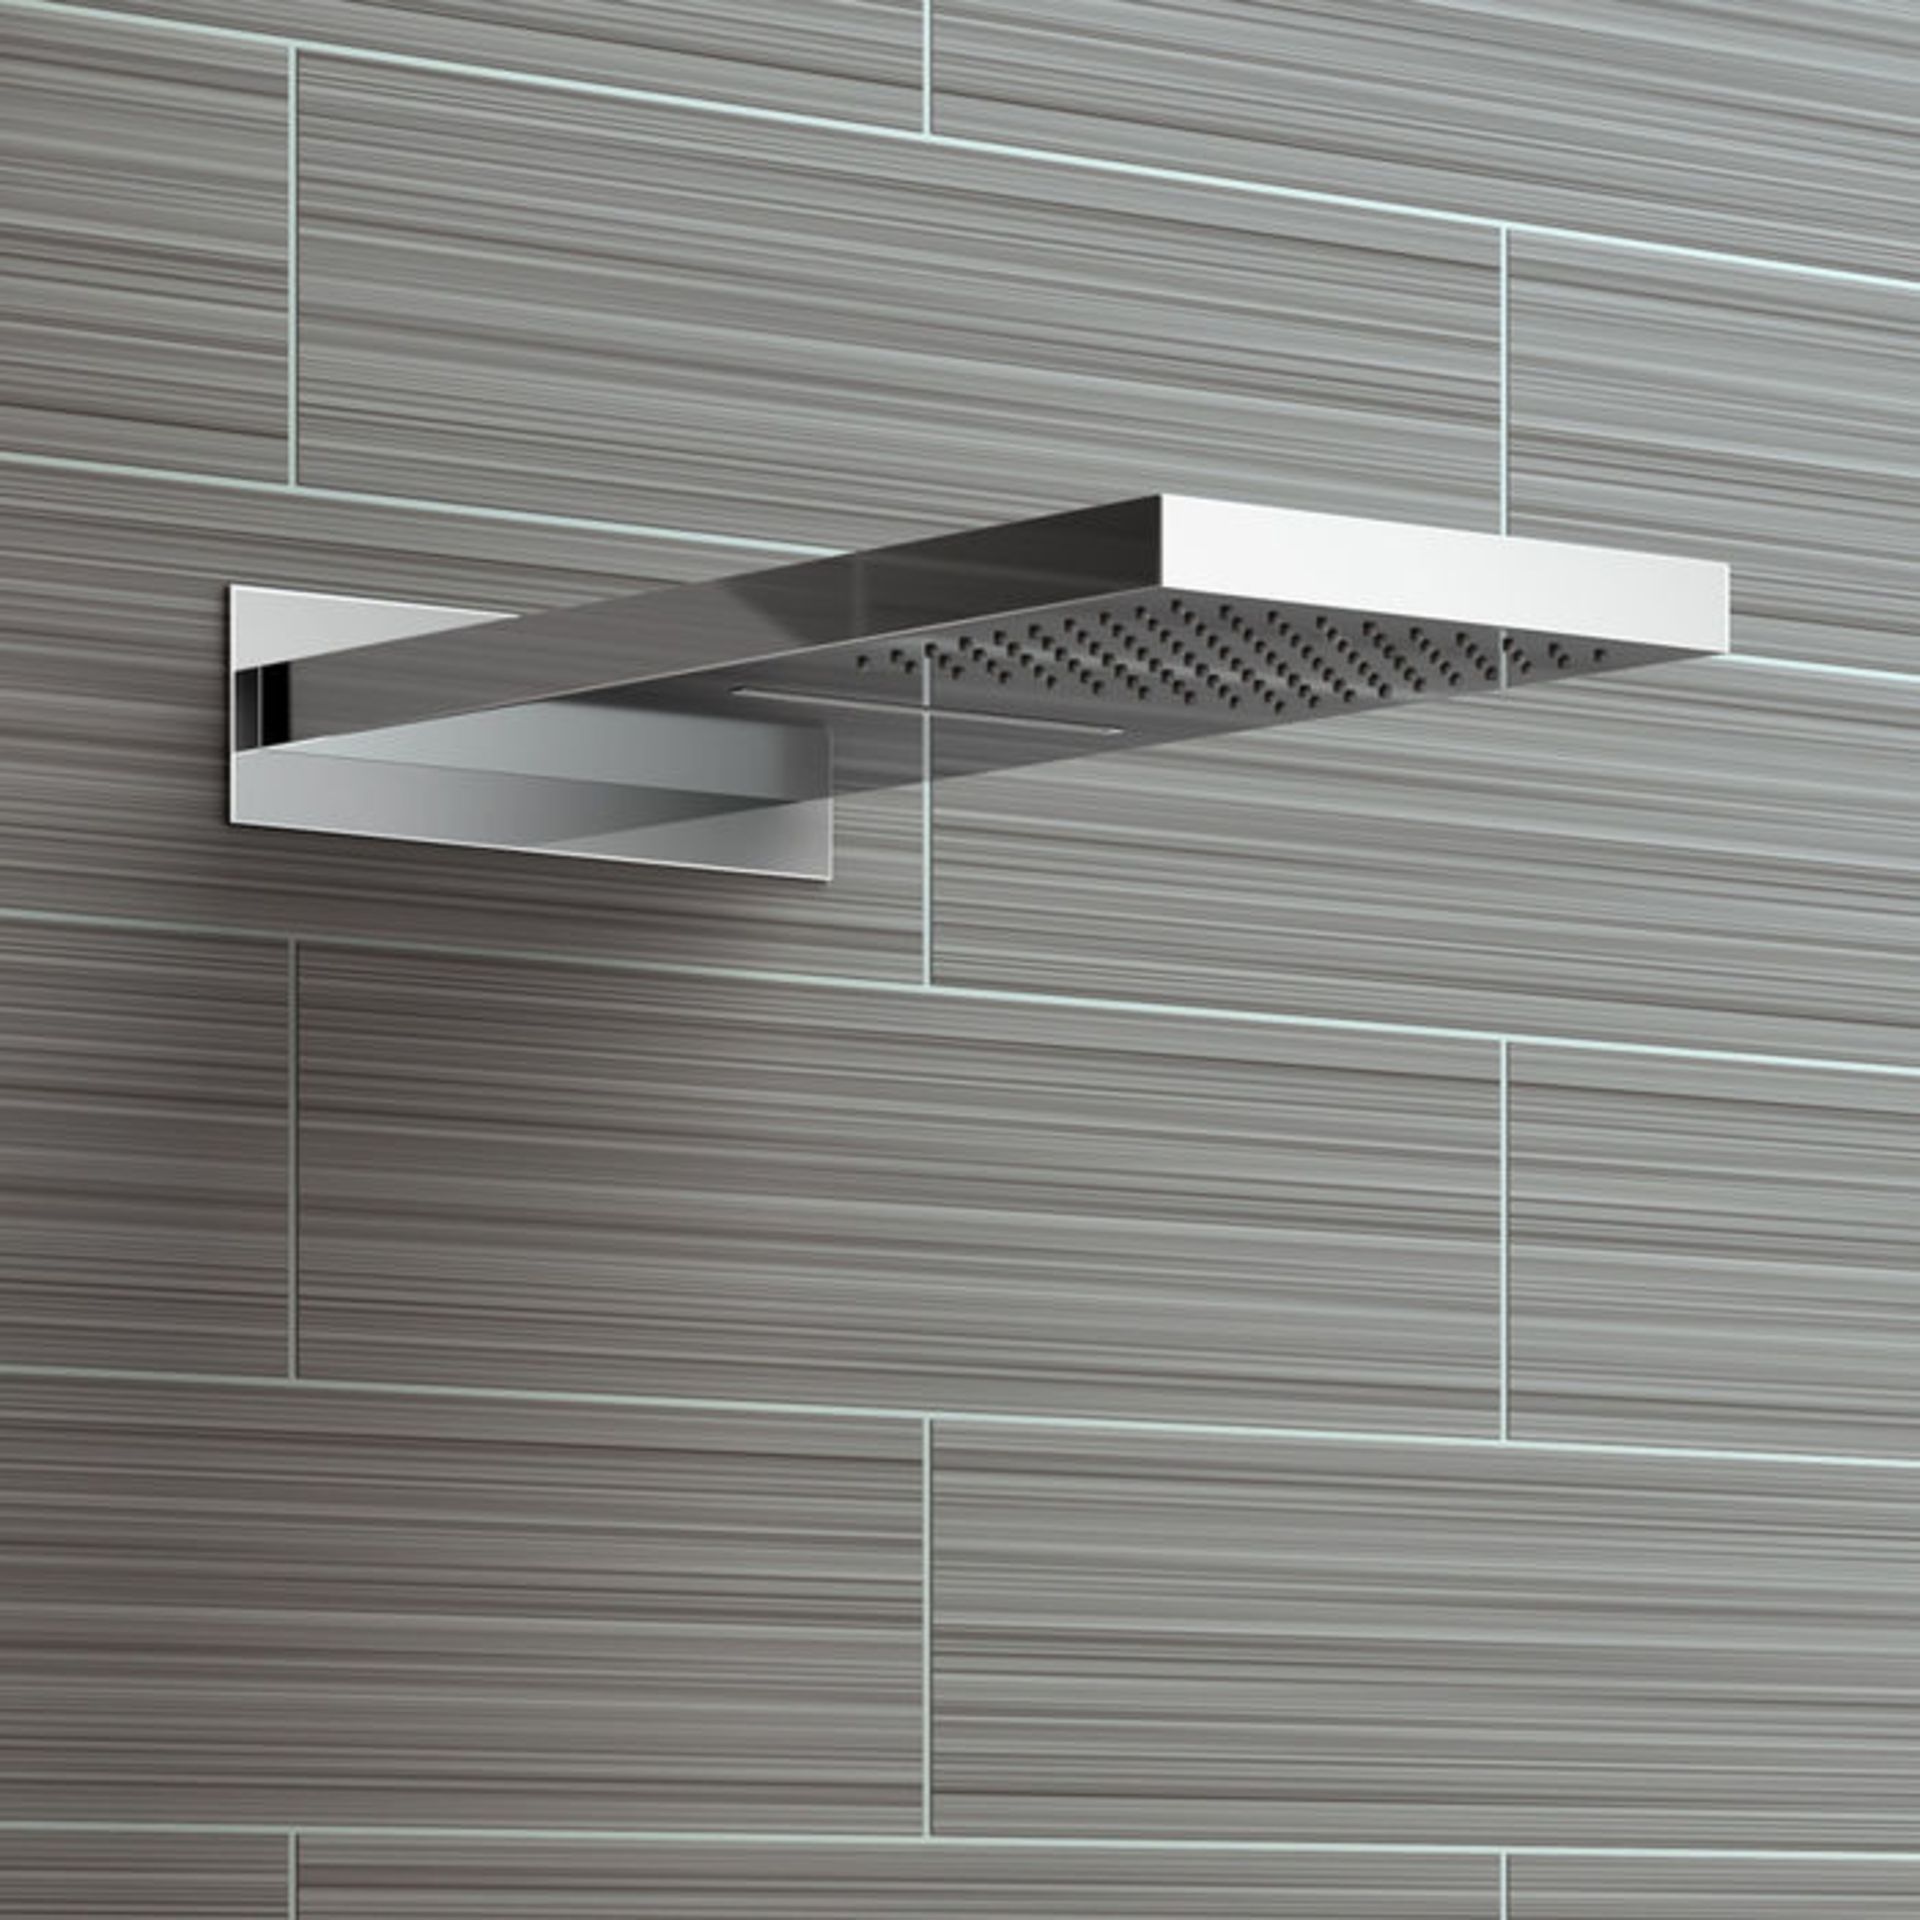 (S92) Stainless Steel 230x500mm Waterfall Shower Head. RRP £374.99 Dual function waterfall and - Bild 4 aus 6